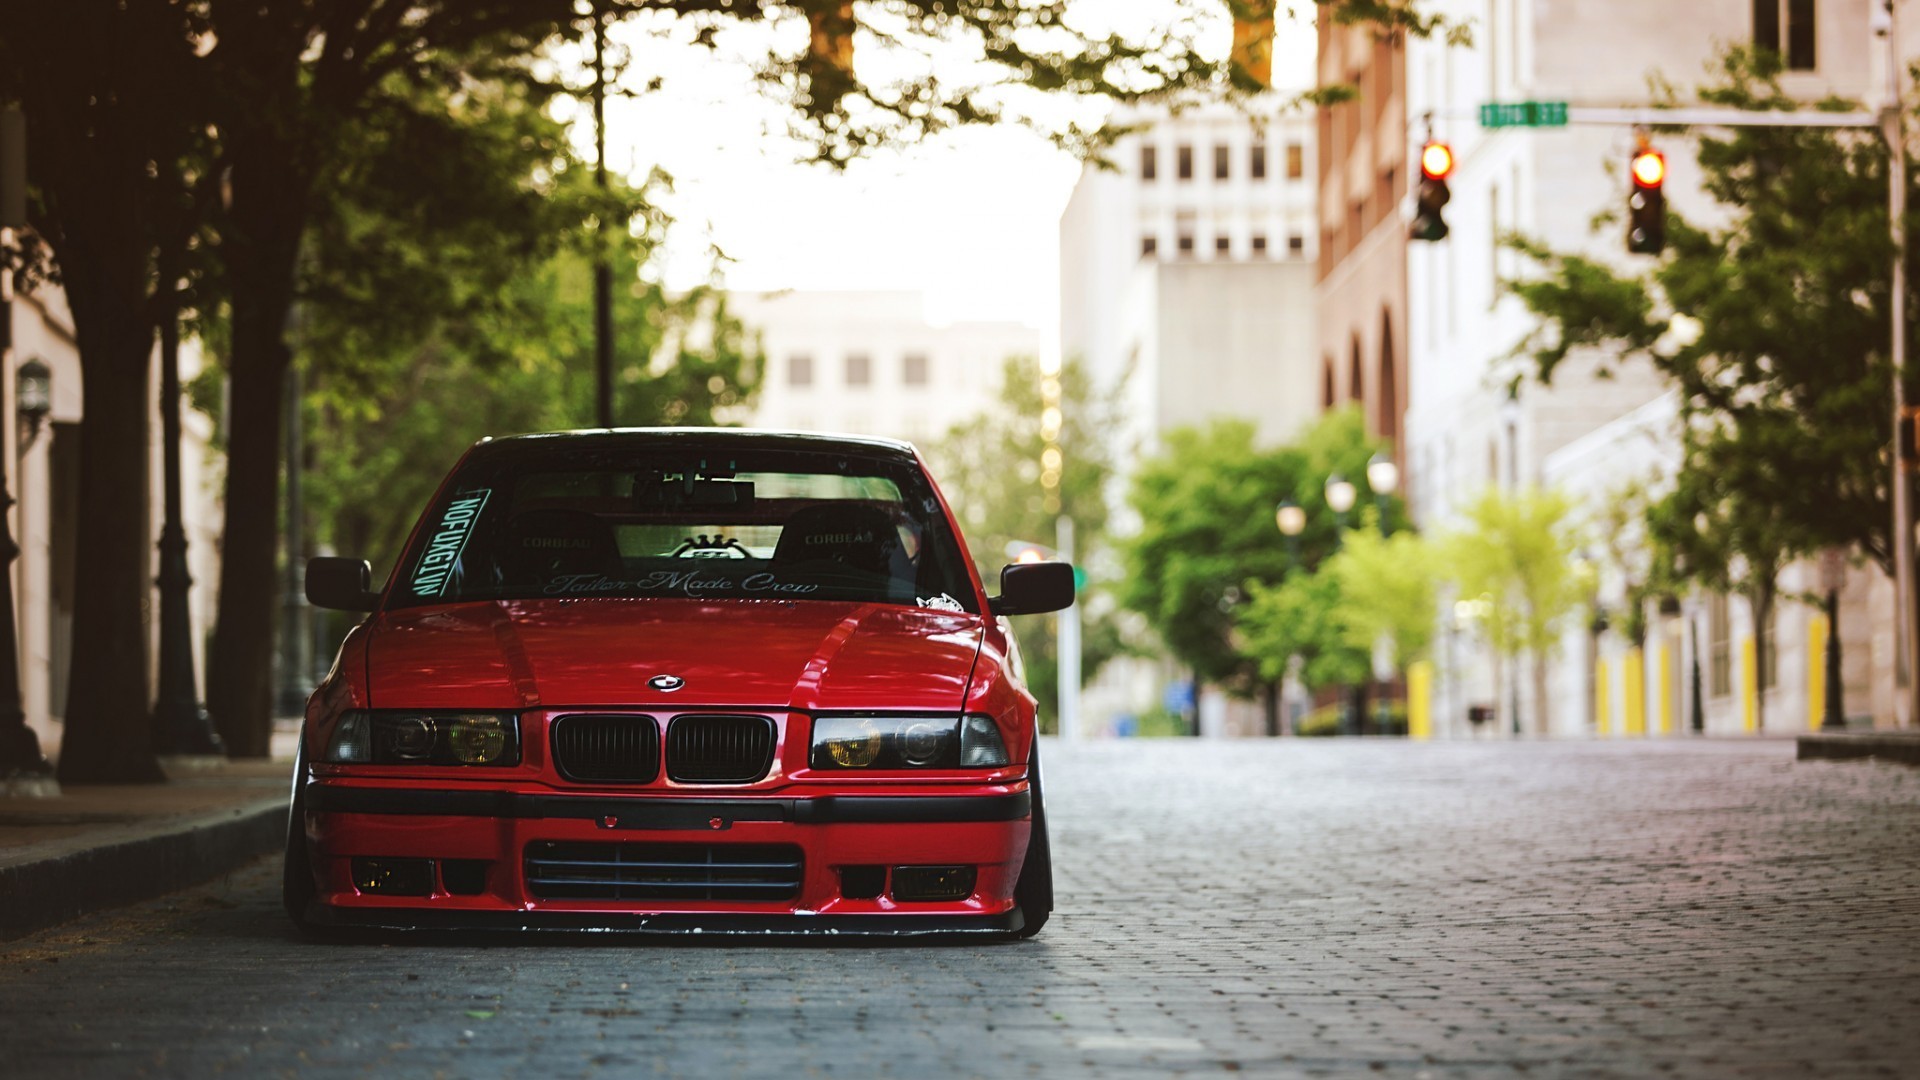 Car BMW Tuning BMW E36 Red Cars BMW 3 Series Frontal View 1920x1080